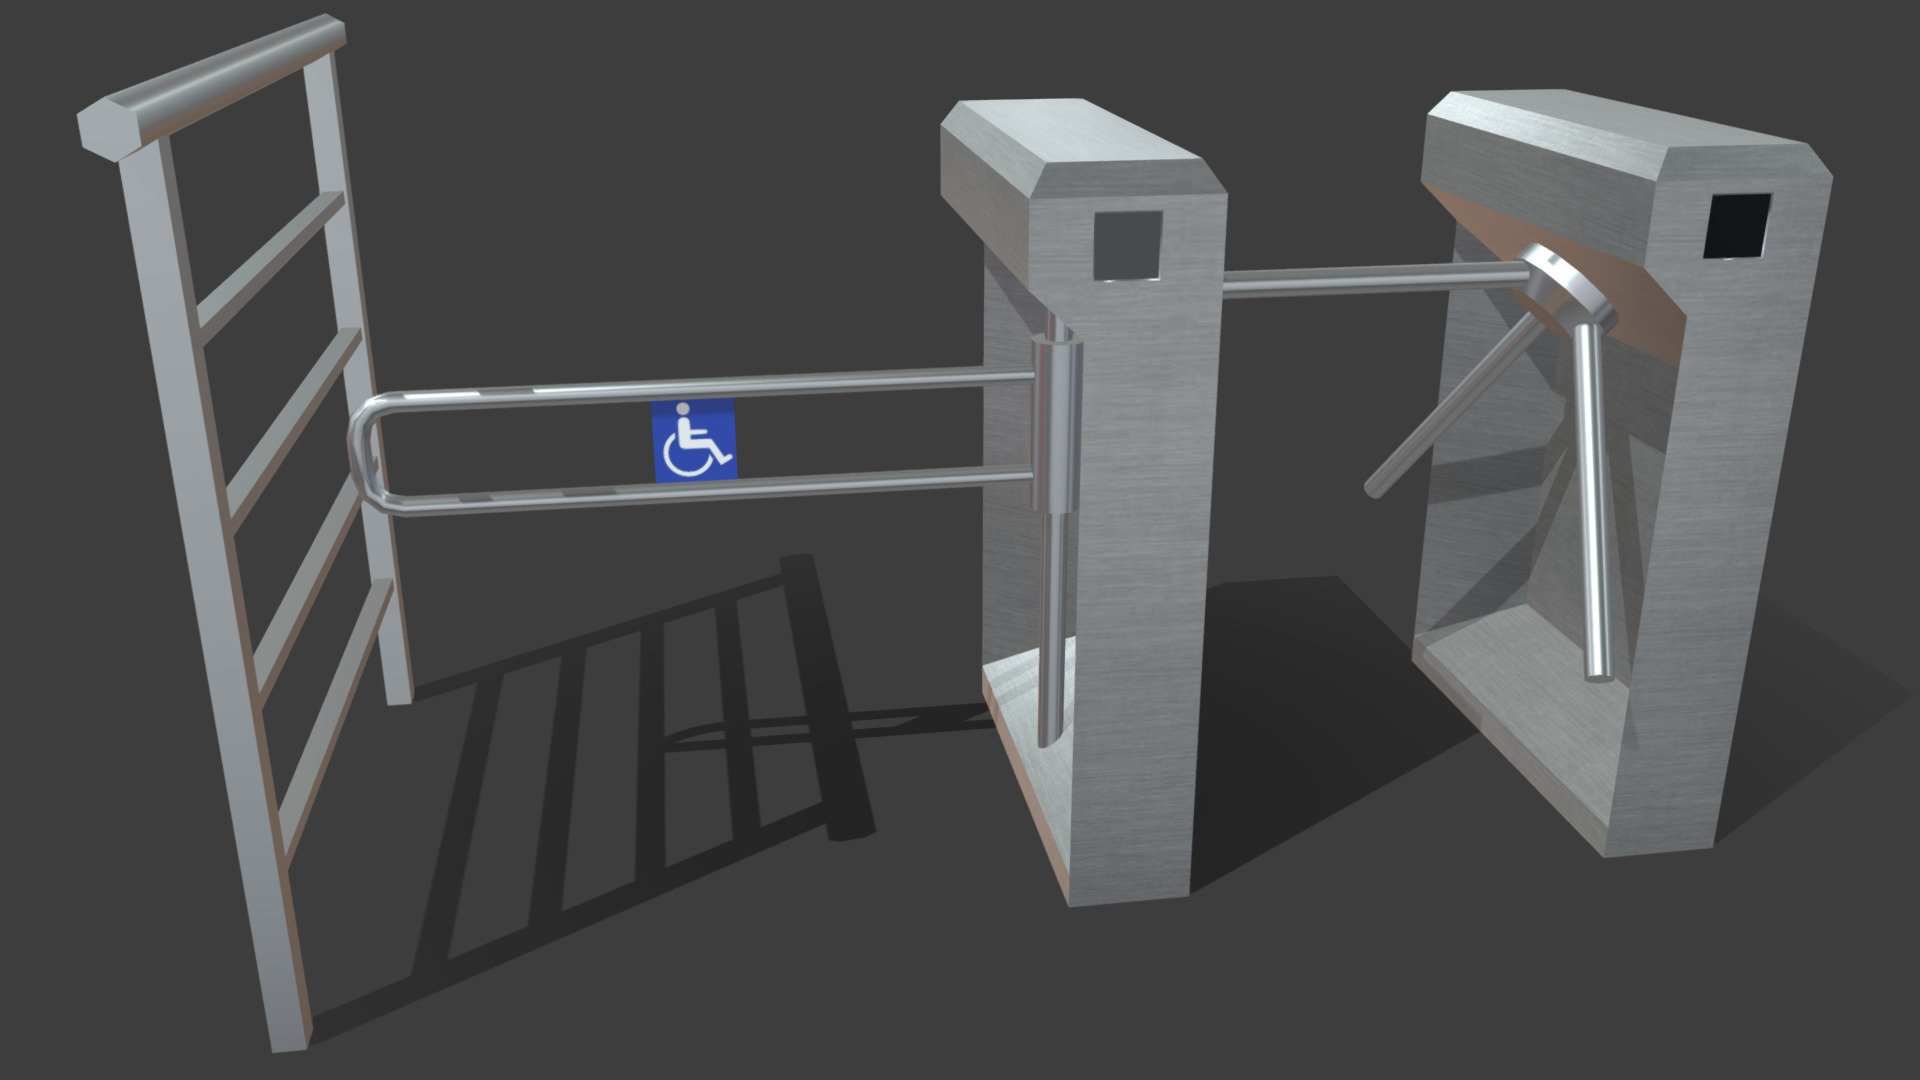 More assets I’ve made to complement a bigger model, these are two turnstiles I made for one of my stadium models. However, here they’re improved and rectified.

A standard tripod turnstile for pedestrians and another one for wheelchair.

Materials and low resolution textures only 3d model